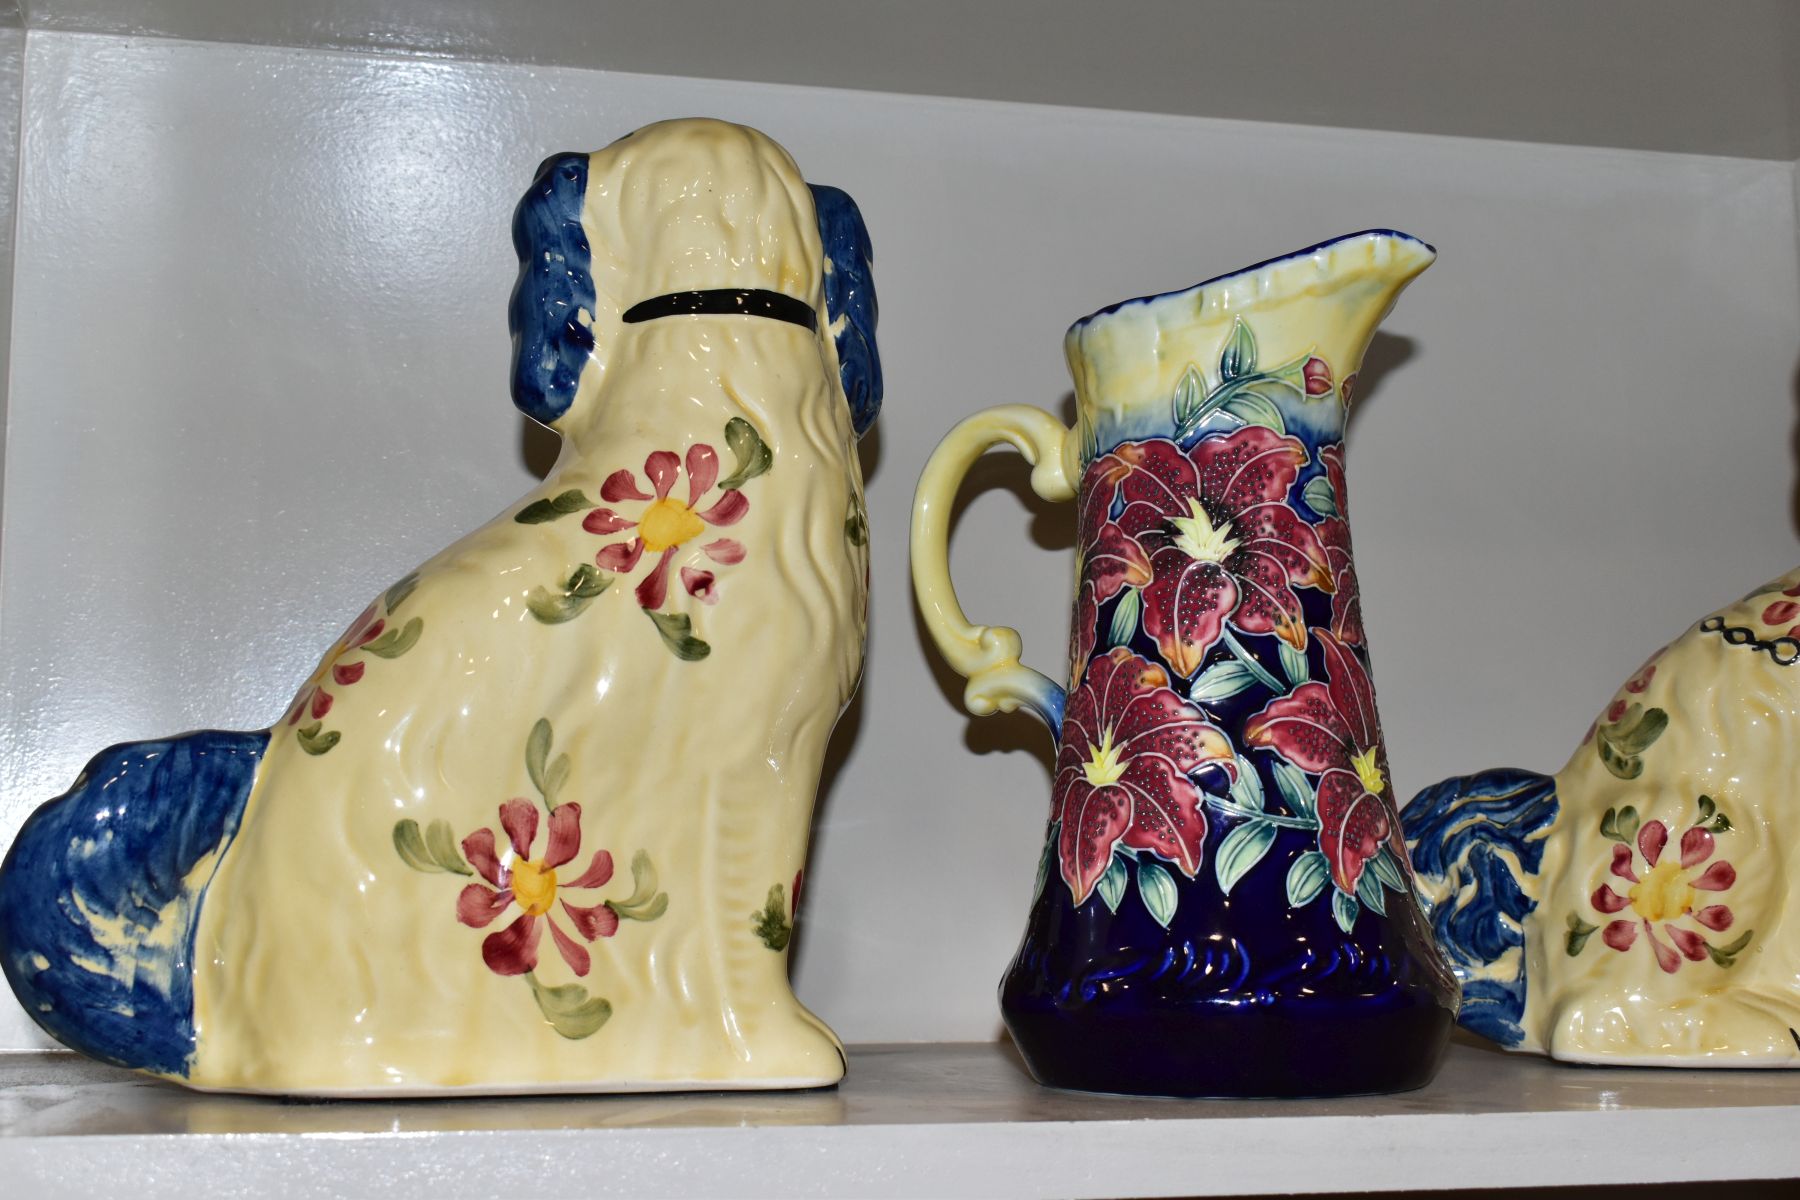 MODERN STAFFORDSHIRE CERAMICS, comprising a pair of Staffordshire dogs by Siltone Pottery, - Image 5 of 7